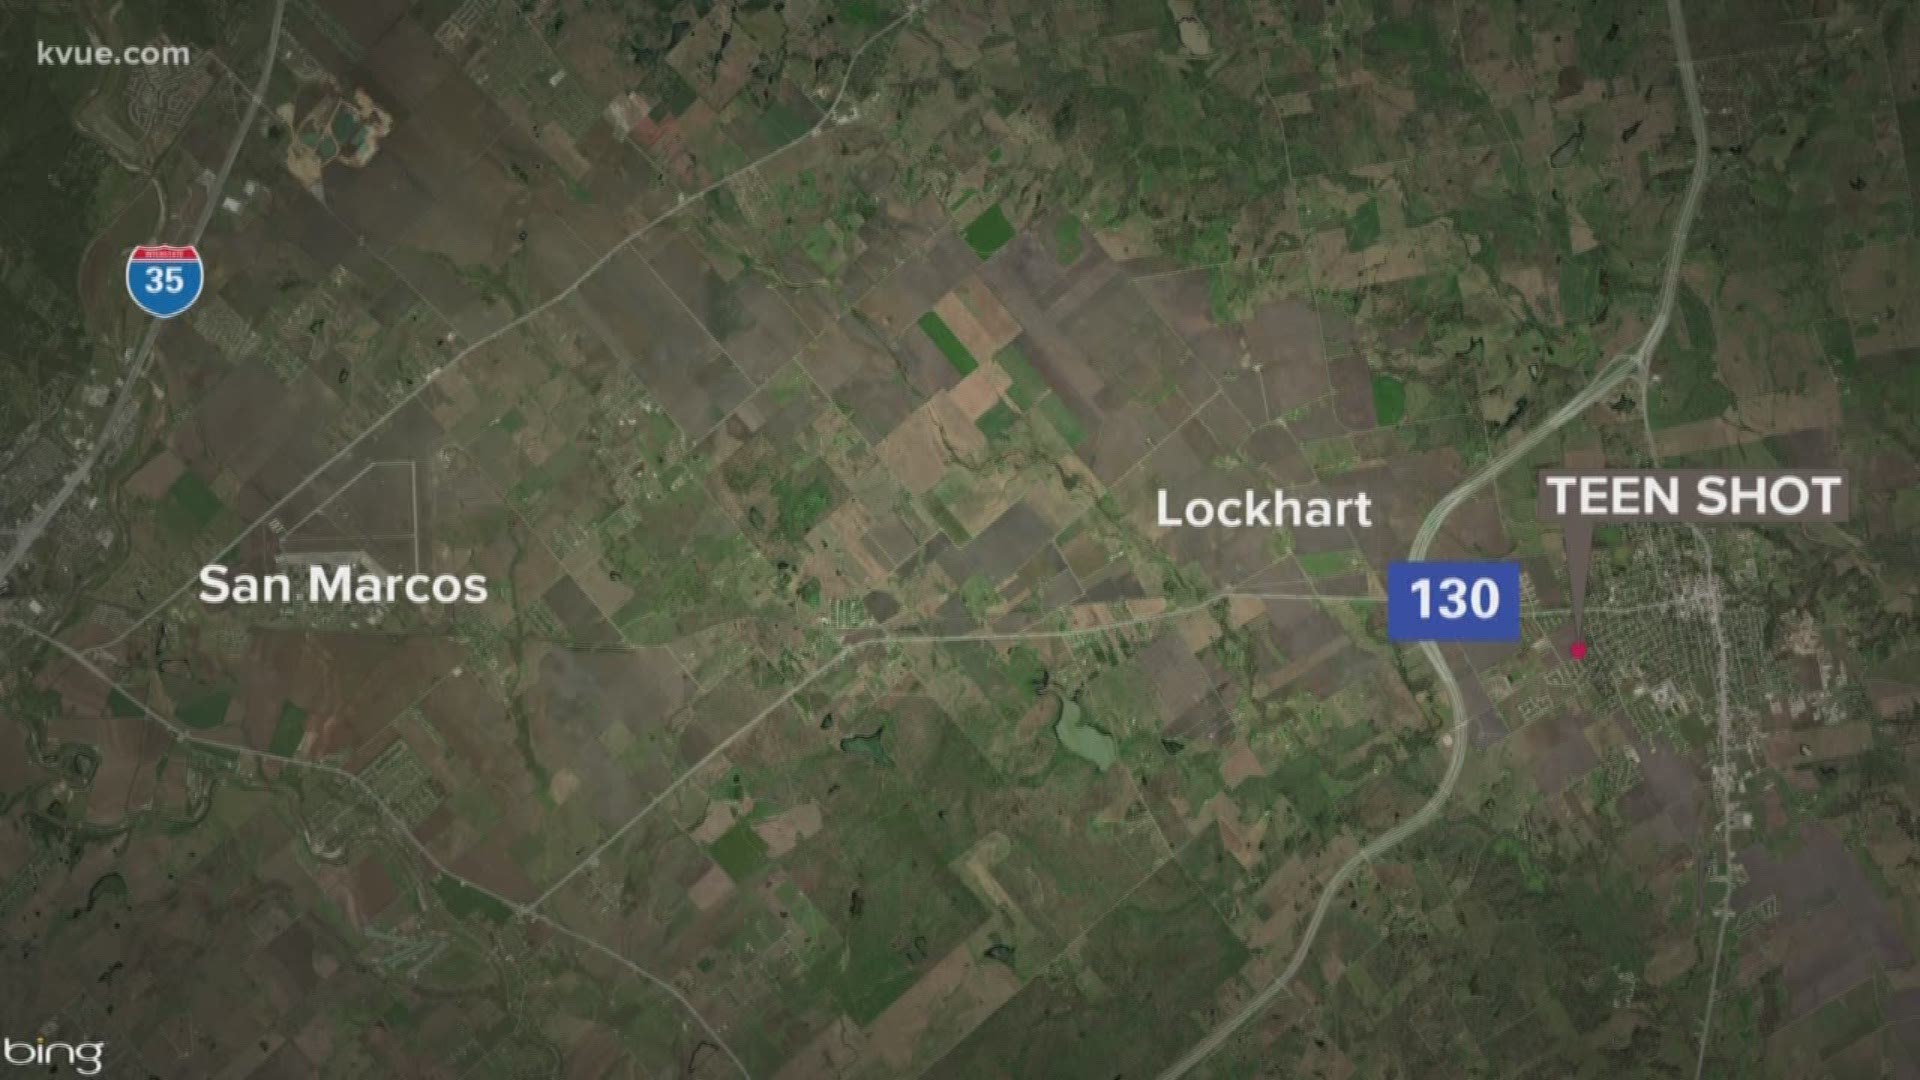 Police in Lockhart are searching for a suspect after a teen was shot.